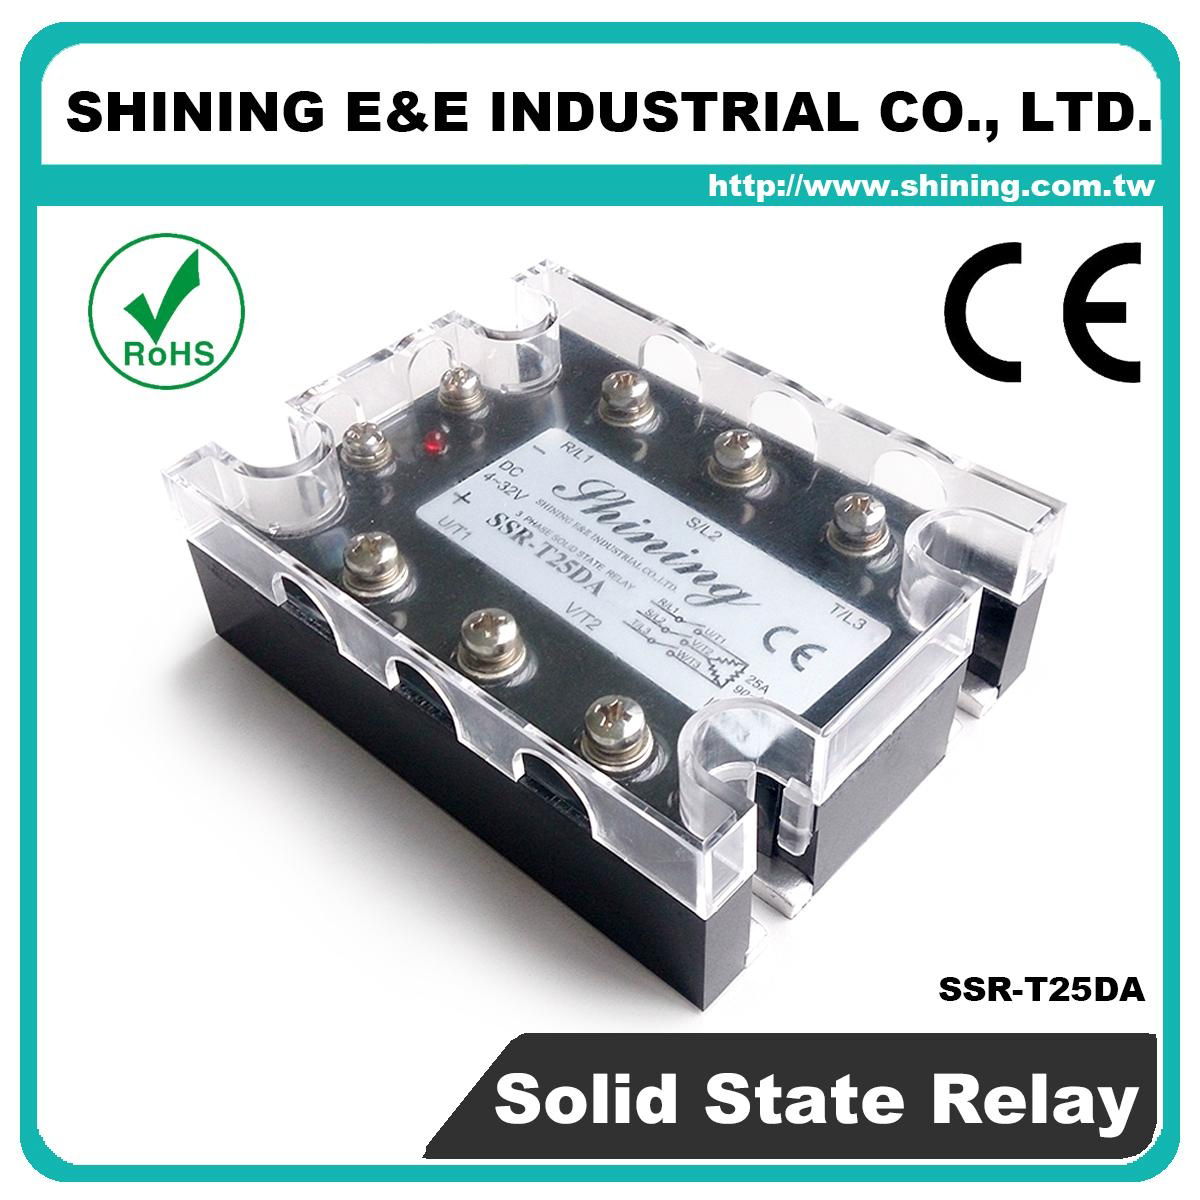 SSR-T25DA DC to AC Zero Cross Three Phase 25A Solid State Relays 3